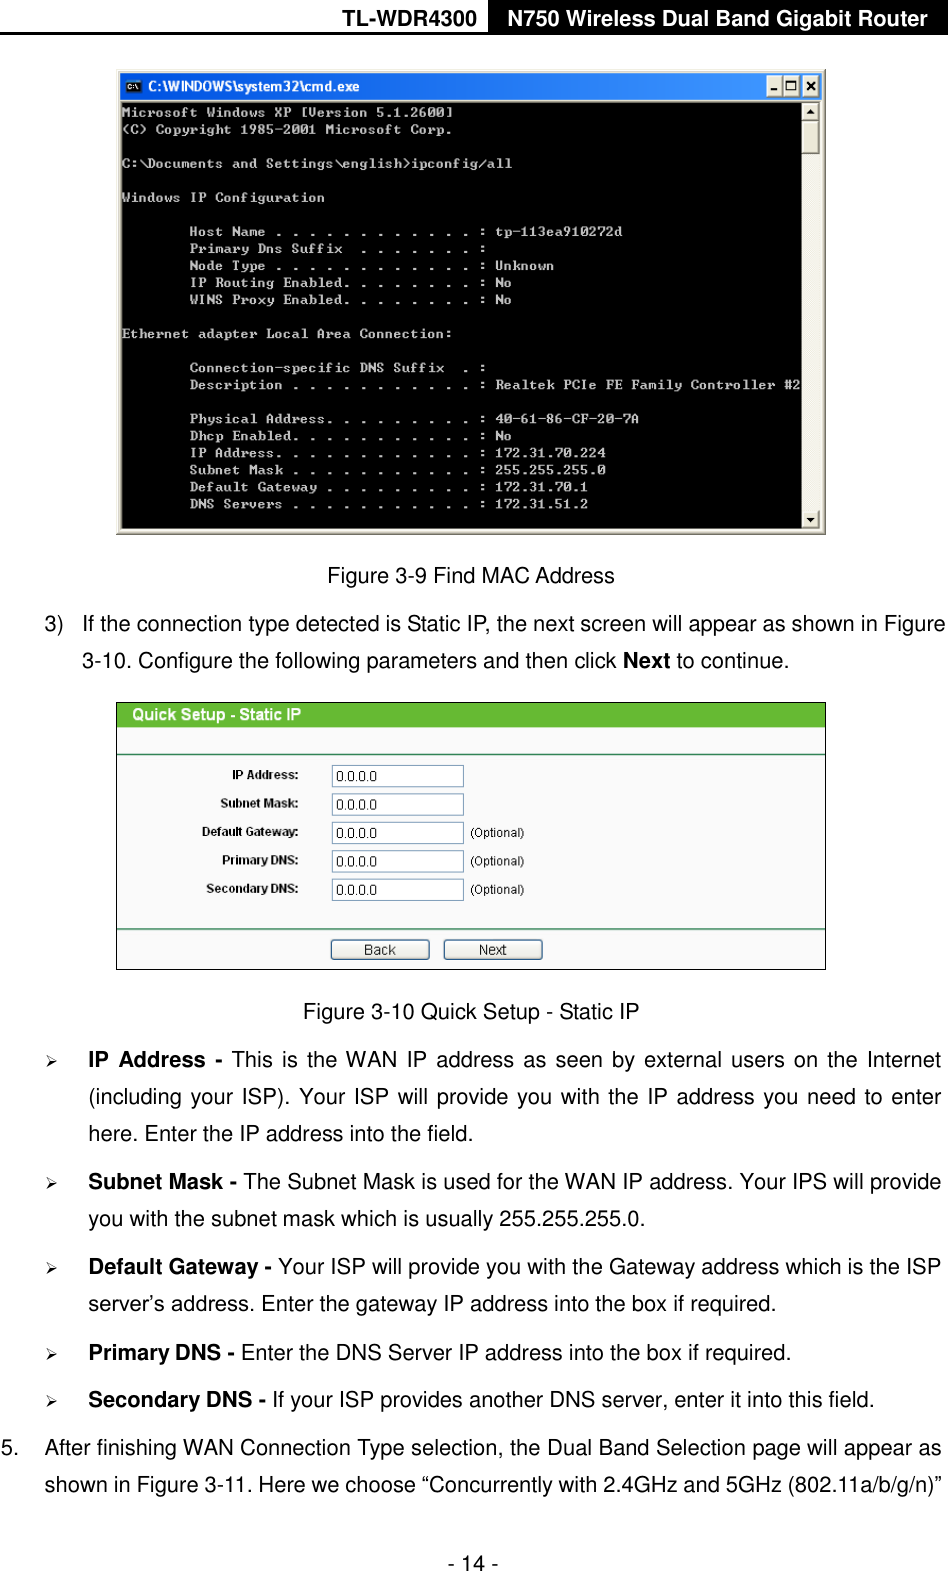 TL-WDR4300 N750 Wireless Dual Band Gigabit Router  - 14 -  Figure 3-9 Find MAC Address 3)  If the connection type detected is Static IP, the next screen will appear as shown in Figure 3-10. Configure the following parameters and then click Next to continue.  Figure 3-10 Quick Setup - Static IP  IP Address - This is the WAN IP address as seen by external users on the Internet (including your ISP). Your ISP will provide you with the IP address you need to enter here. Enter the IP address into the field.  Subnet Mask - The Subnet Mask is used for the WAN IP address. Your IPS will provide you with the subnet mask which is usually 255.255.255.0.  Default Gateway - Your ISP will provide you with the Gateway address which is the ISP server’s address. Enter the gateway IP address into the box if required.  Primary DNS - Enter the DNS Server IP address into the box if required.    Secondary DNS - If your ISP provides another DNS server, enter it into this field. 5.  After finishing WAN Connection Type selection, the Dual Band Selection page will appear as shown in Figure 3-11. Here we choose “Concurrently with 2.4GHz and 5GHz (802.11a/b/g/n)” 